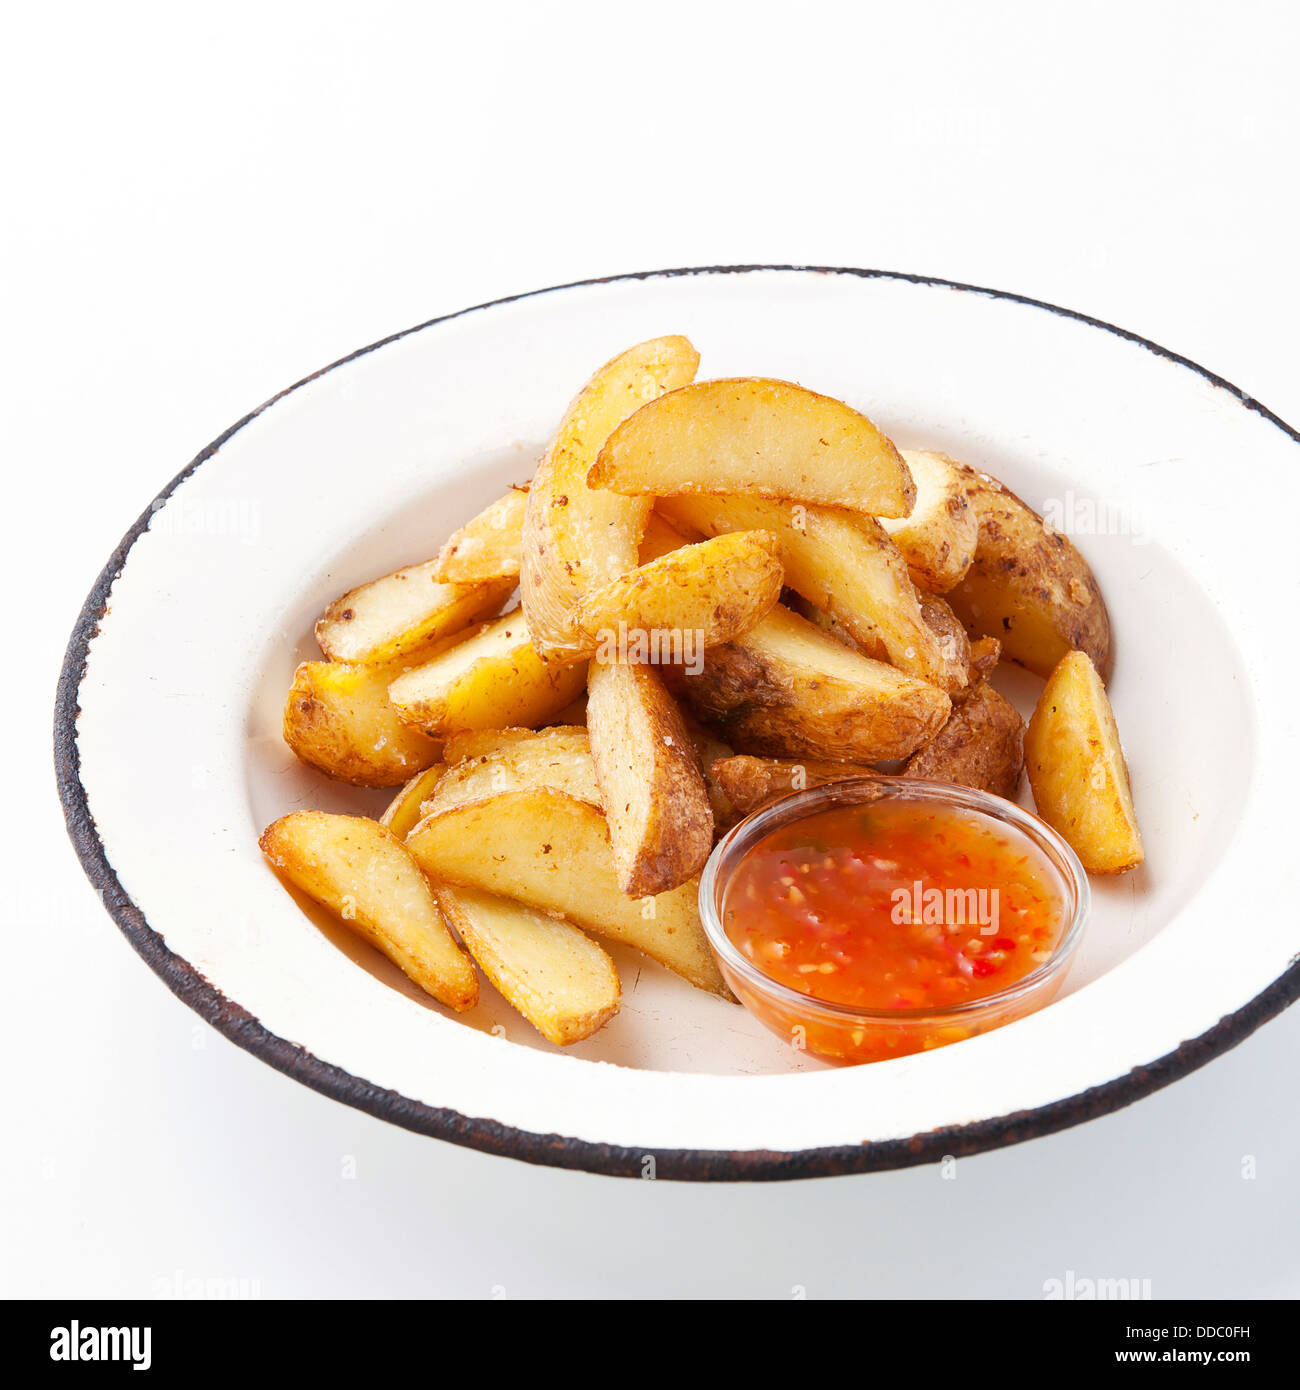 Fried potato 'country-style' with sauce Stock Photo